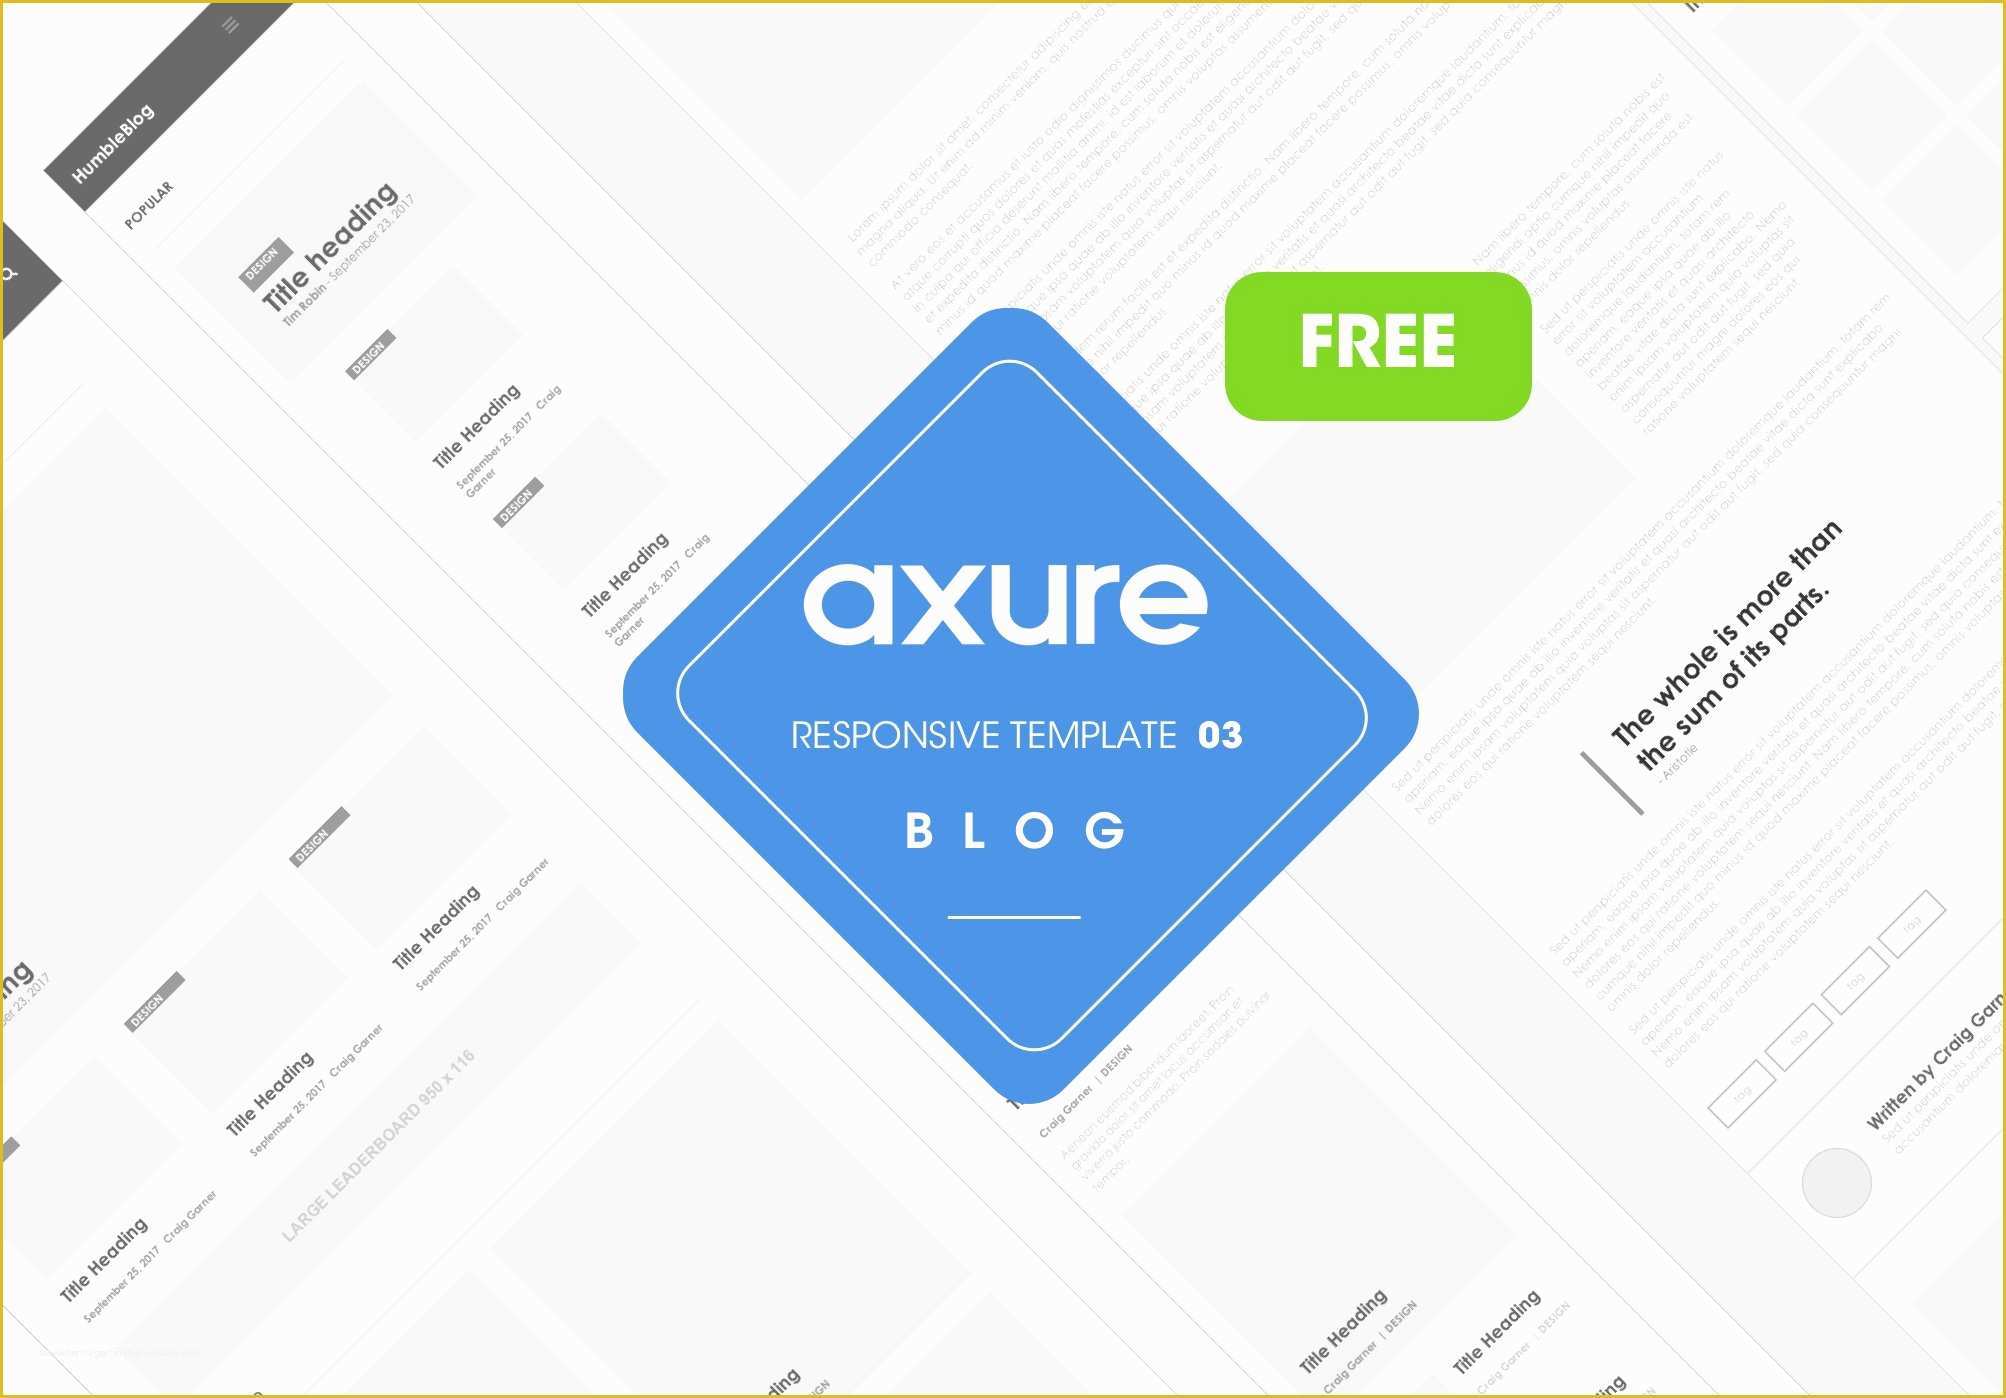 Expression Web Templates Free Responsive Of Axure Responsive Template Blog Free Website Templates